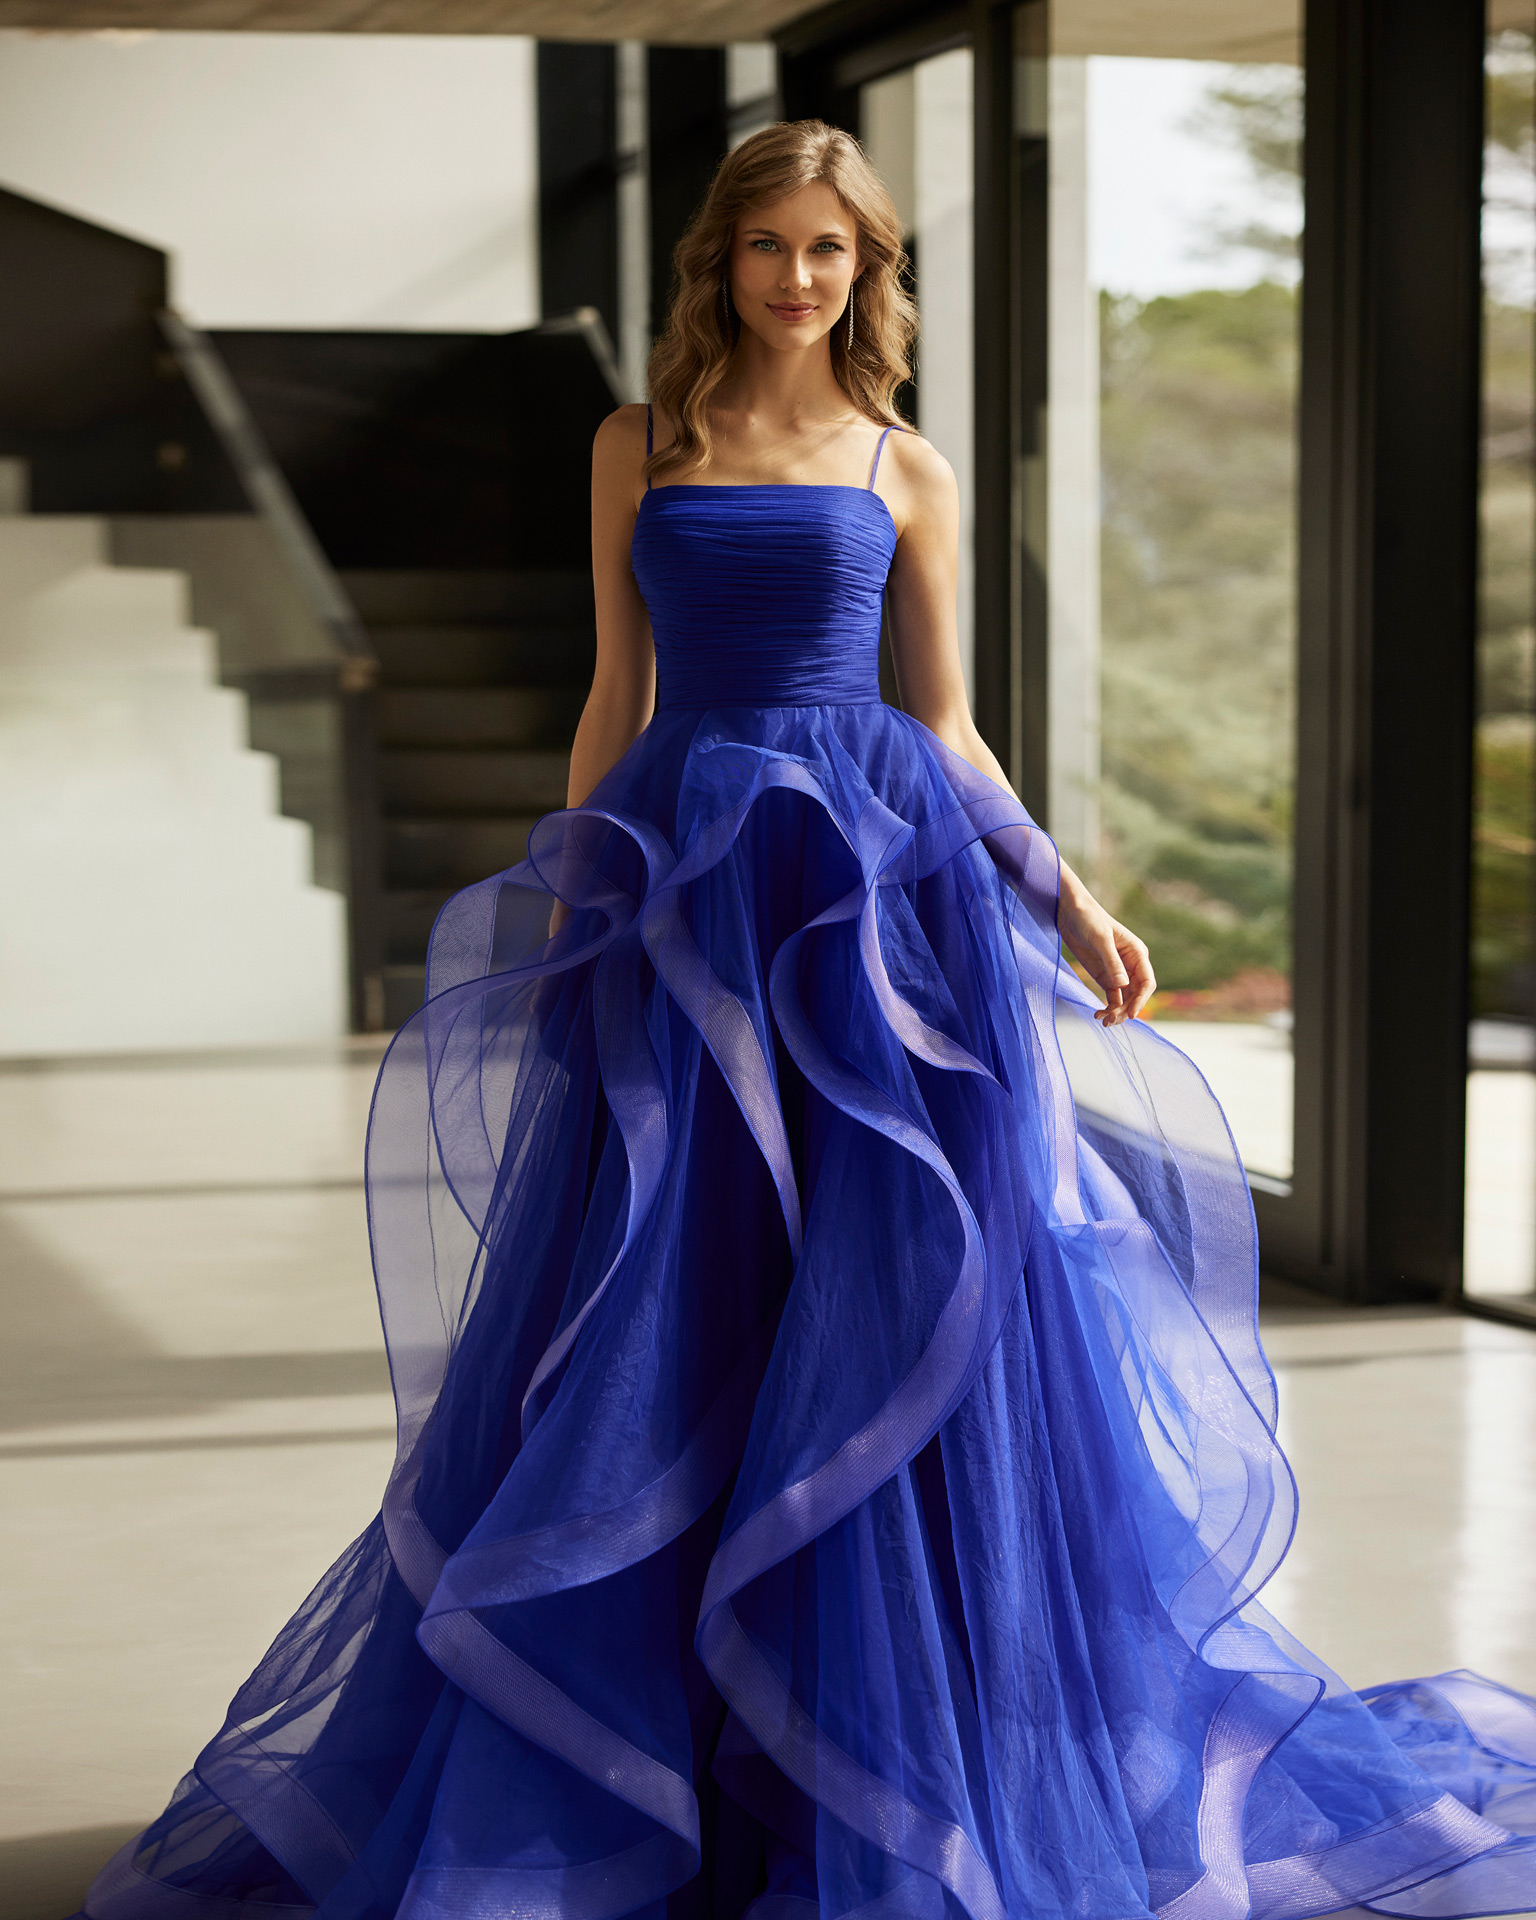 Fantasy long evening dress; made in tul, with strapless neckline,  closed back and detachable straps.  Ruffled skirts. Marfil Barcelona. MARFIL_BARCELONA.